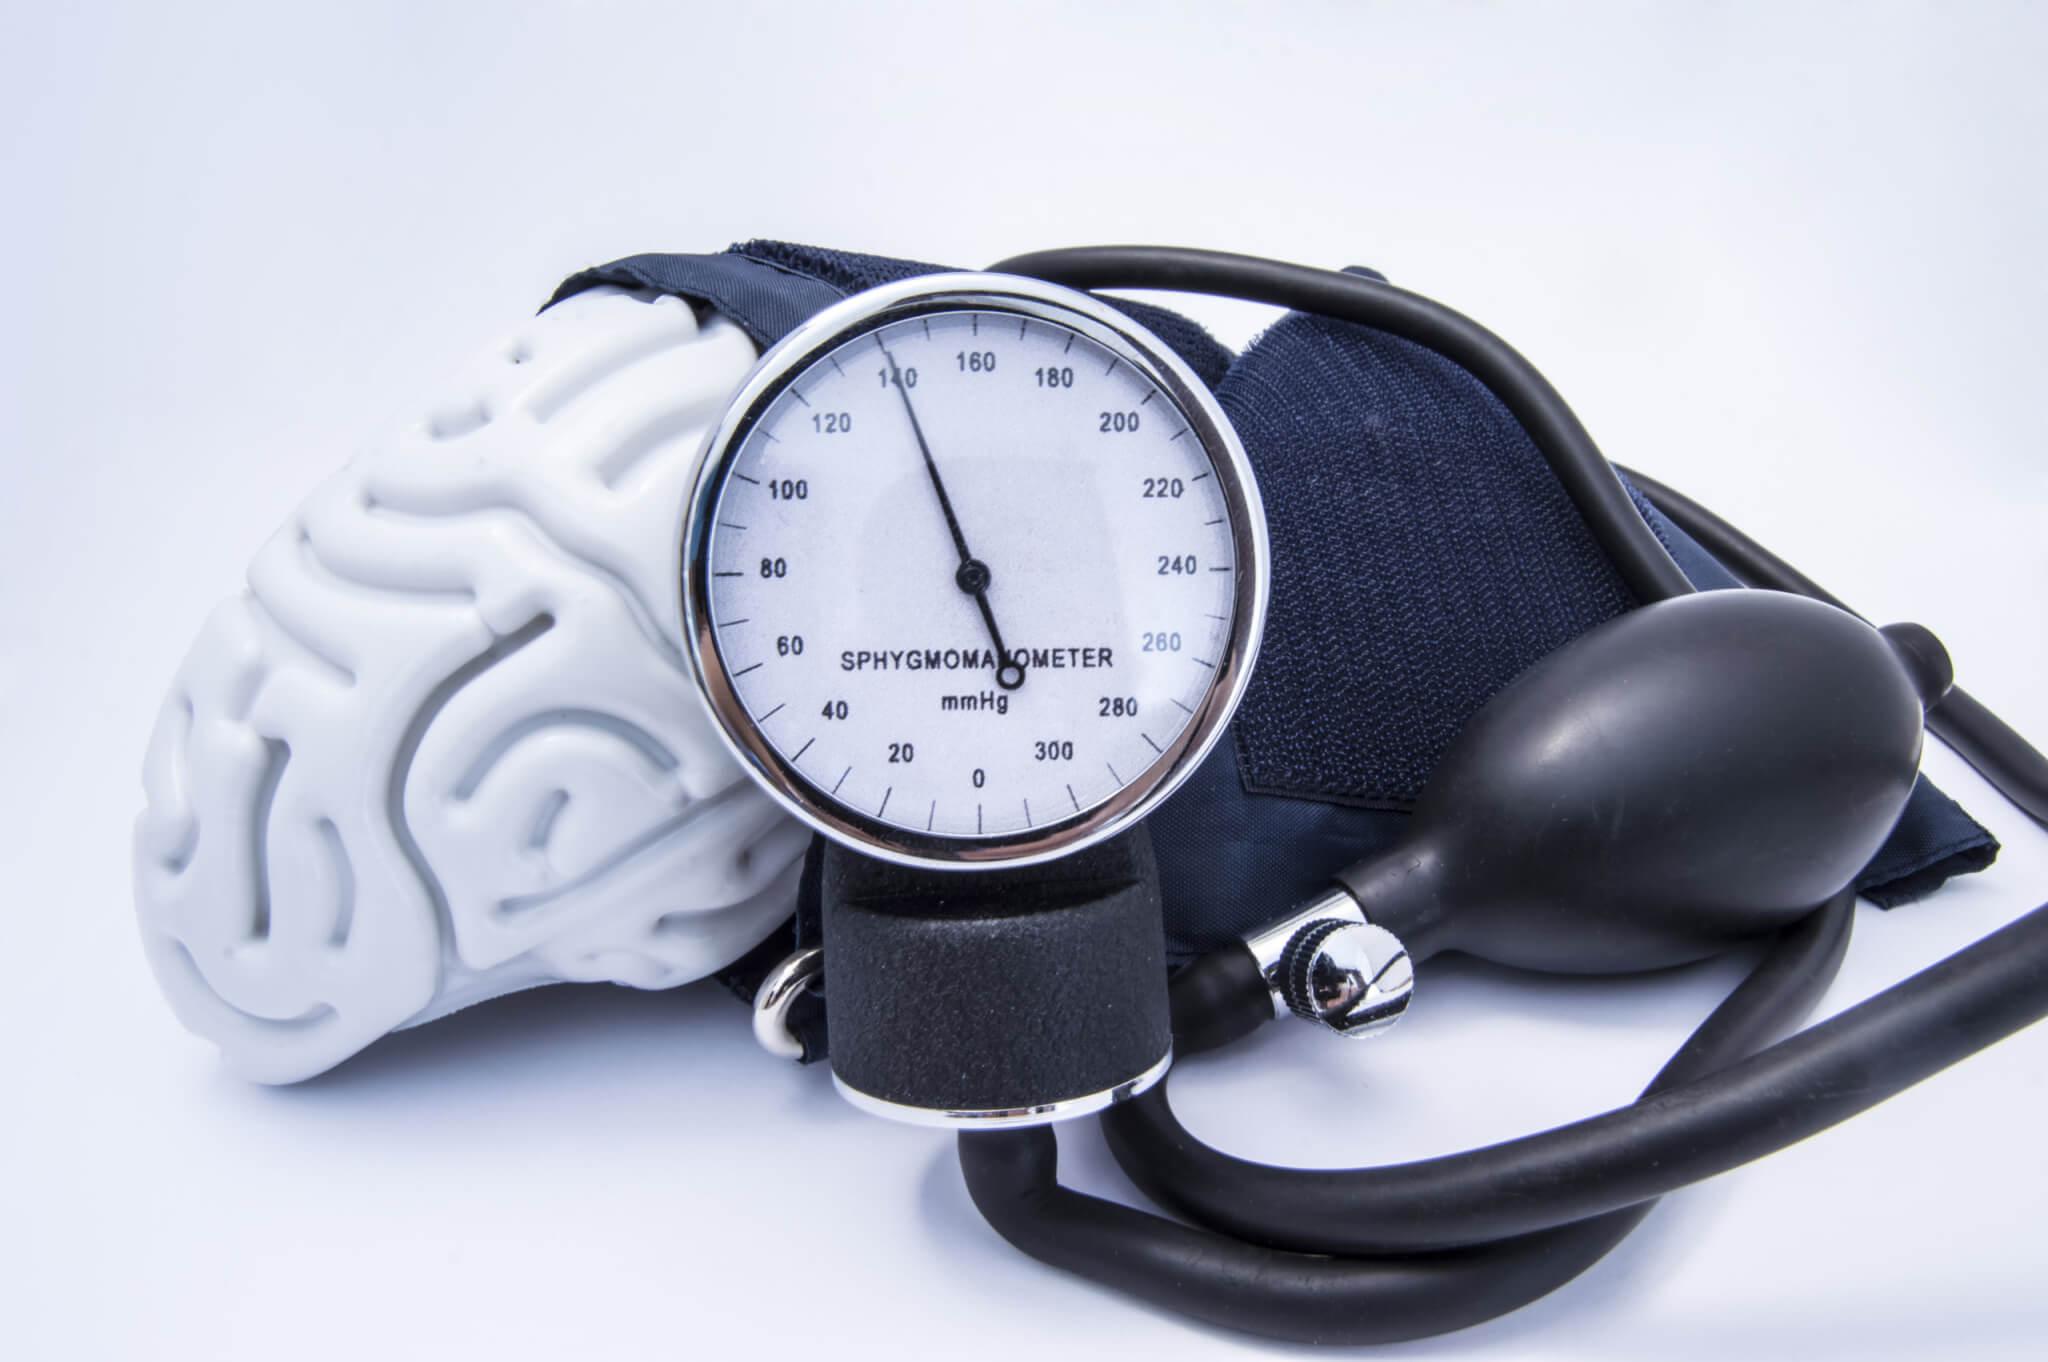 High blood pressure in your 30s could lead to dementia in your 70s